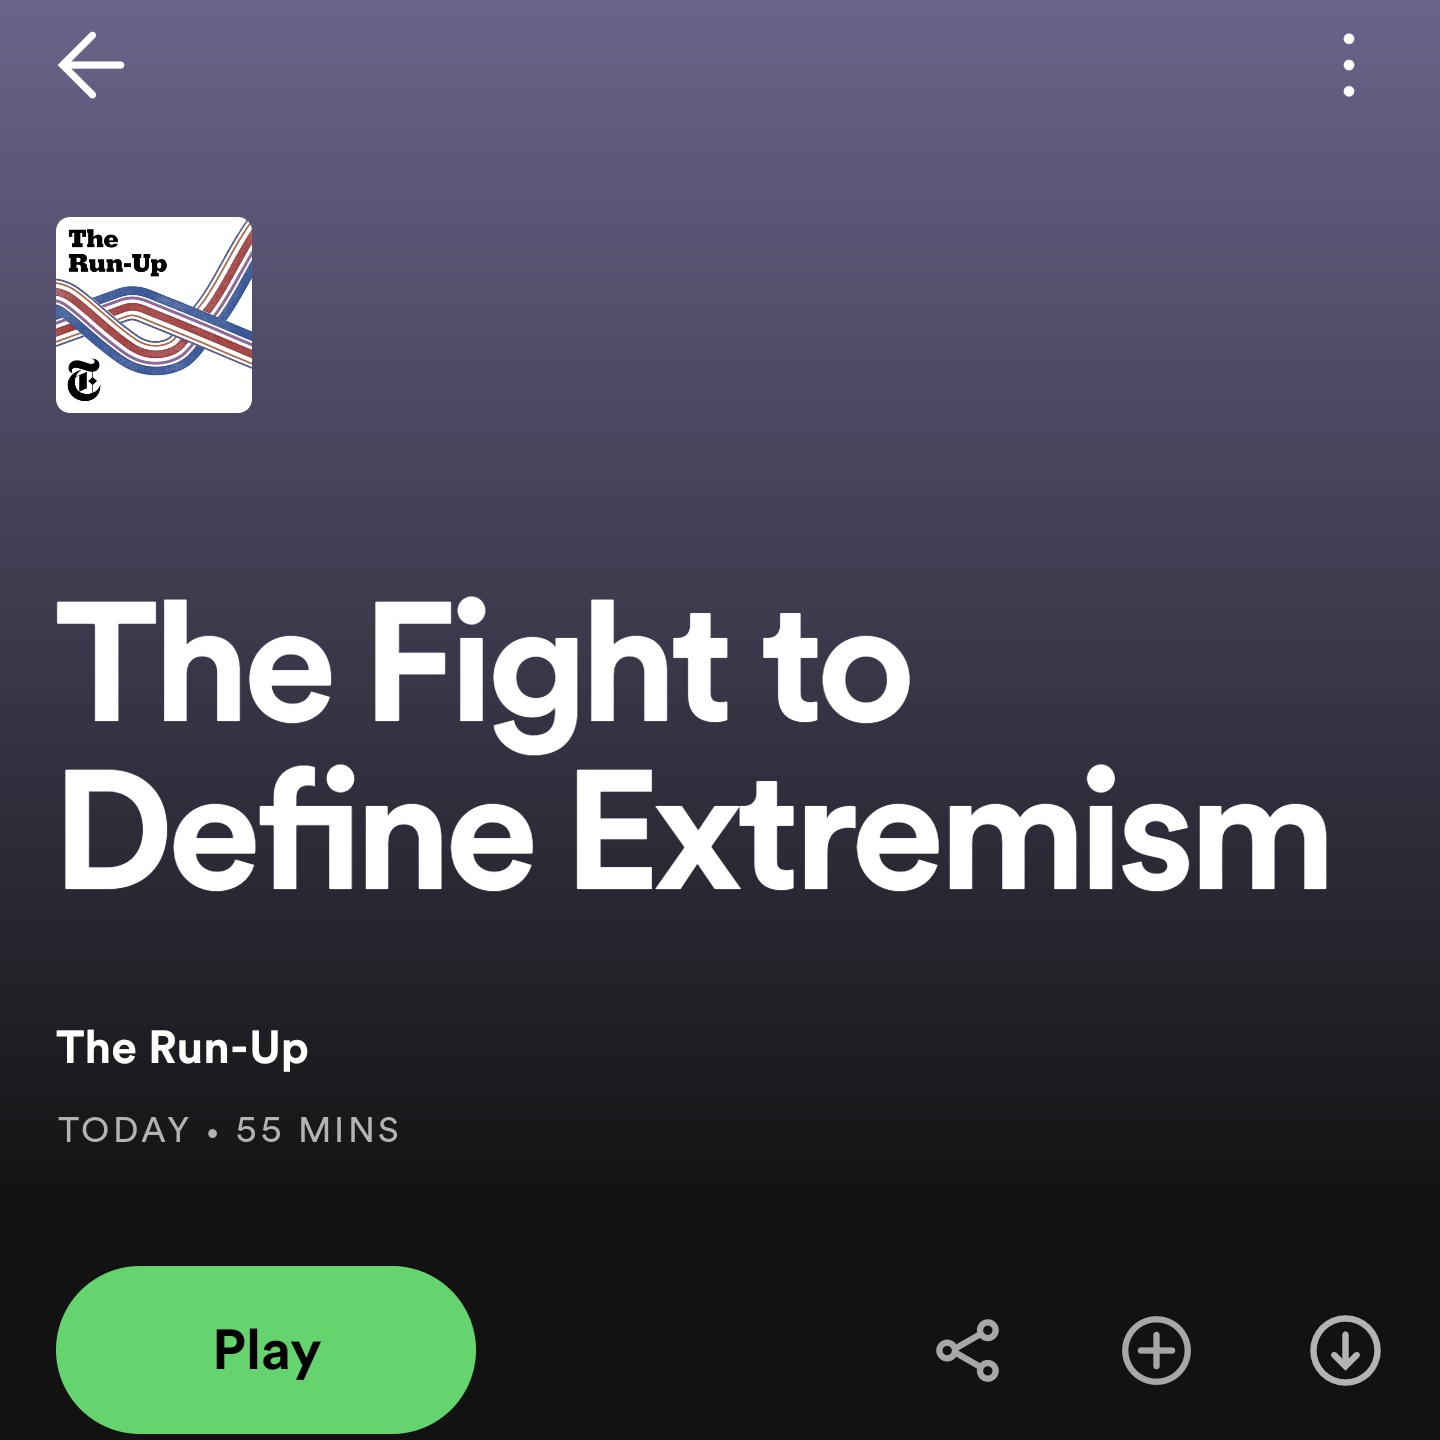 The Extremist  The New Yorker